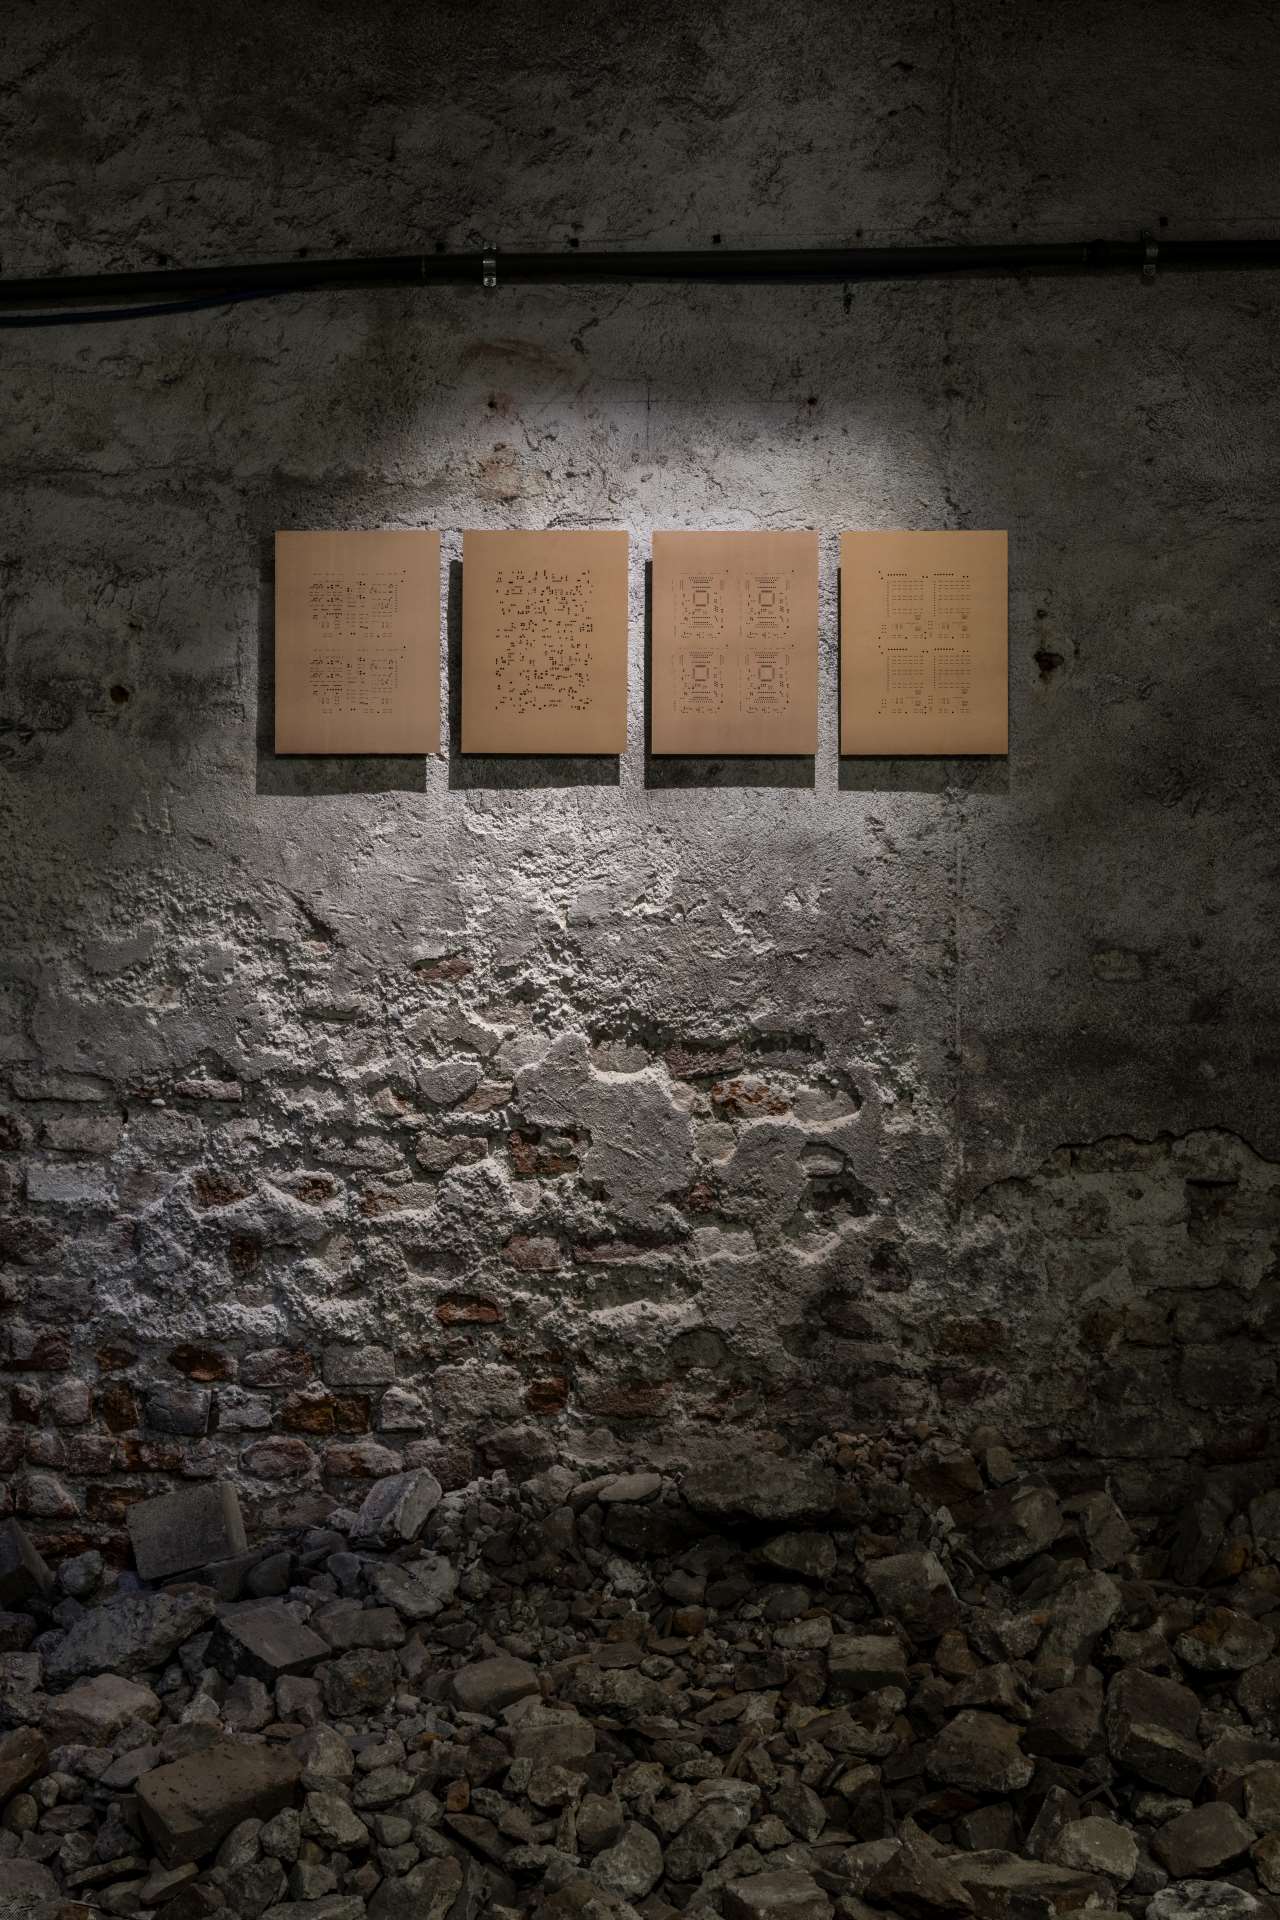 Exhibition view of Human Code by Roberto Sironi, featuring Traces (2019). Photo by Federico Villa.